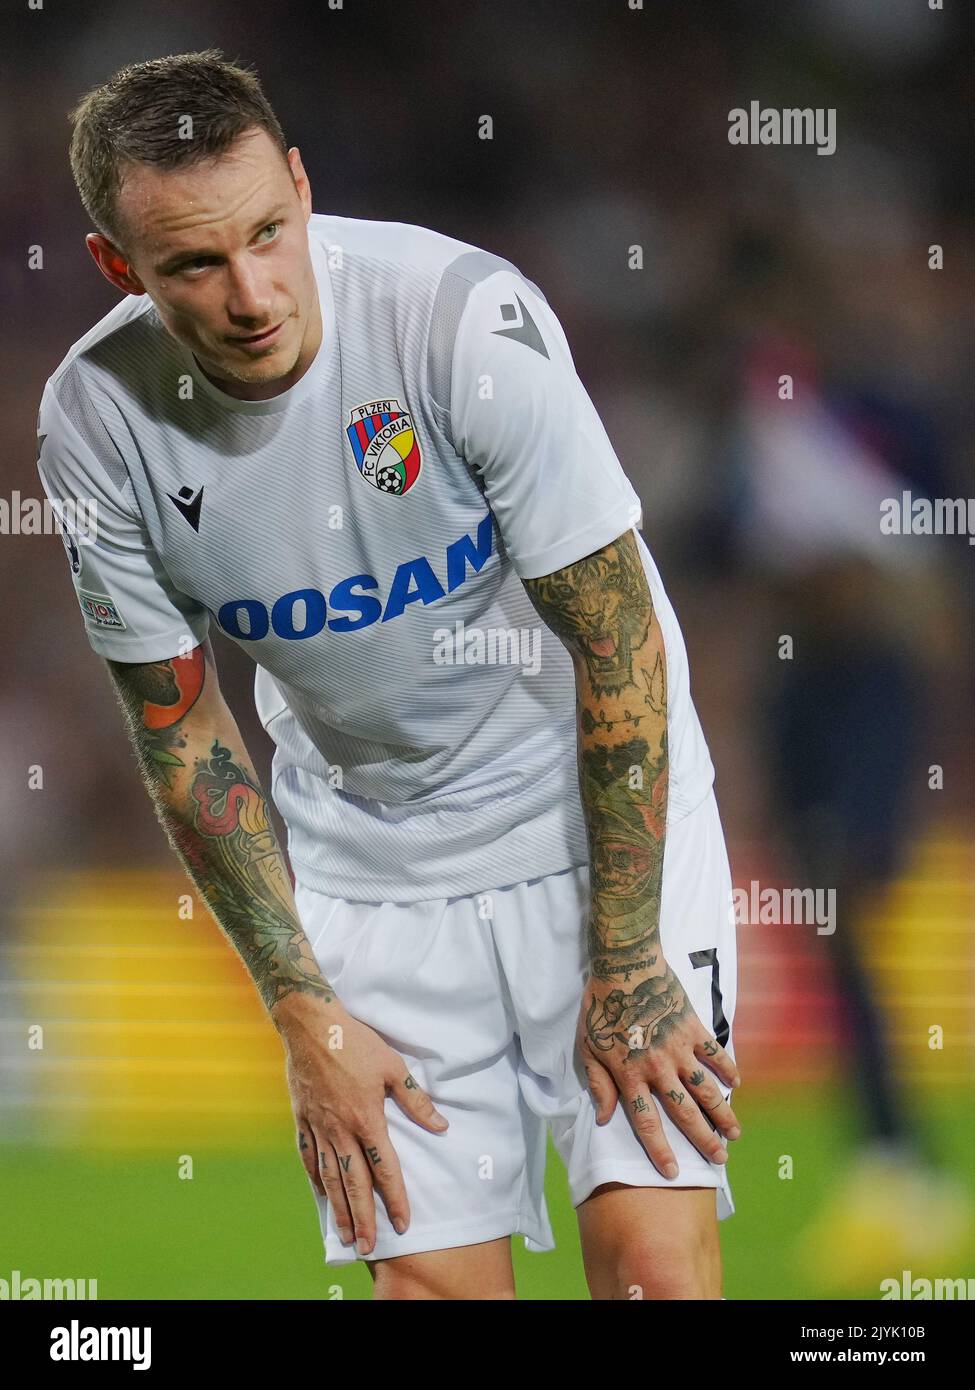 Barcelona, Spain. 07th Sep, 2022. Jan Sykora of Viktoria Plzen looks ahead during the UEFA Champions League match between FC Barcelona and Viktoria Plzen, Group C, played at Spotify Camp Nou Stadum on Sep 7, 2022 in Barcelona, Spain. (Photo by Colas Buera/PRESSIN) Credit: PRESSINPHOTO SPORTS AGENCY/Alamy Live News Stock Photo